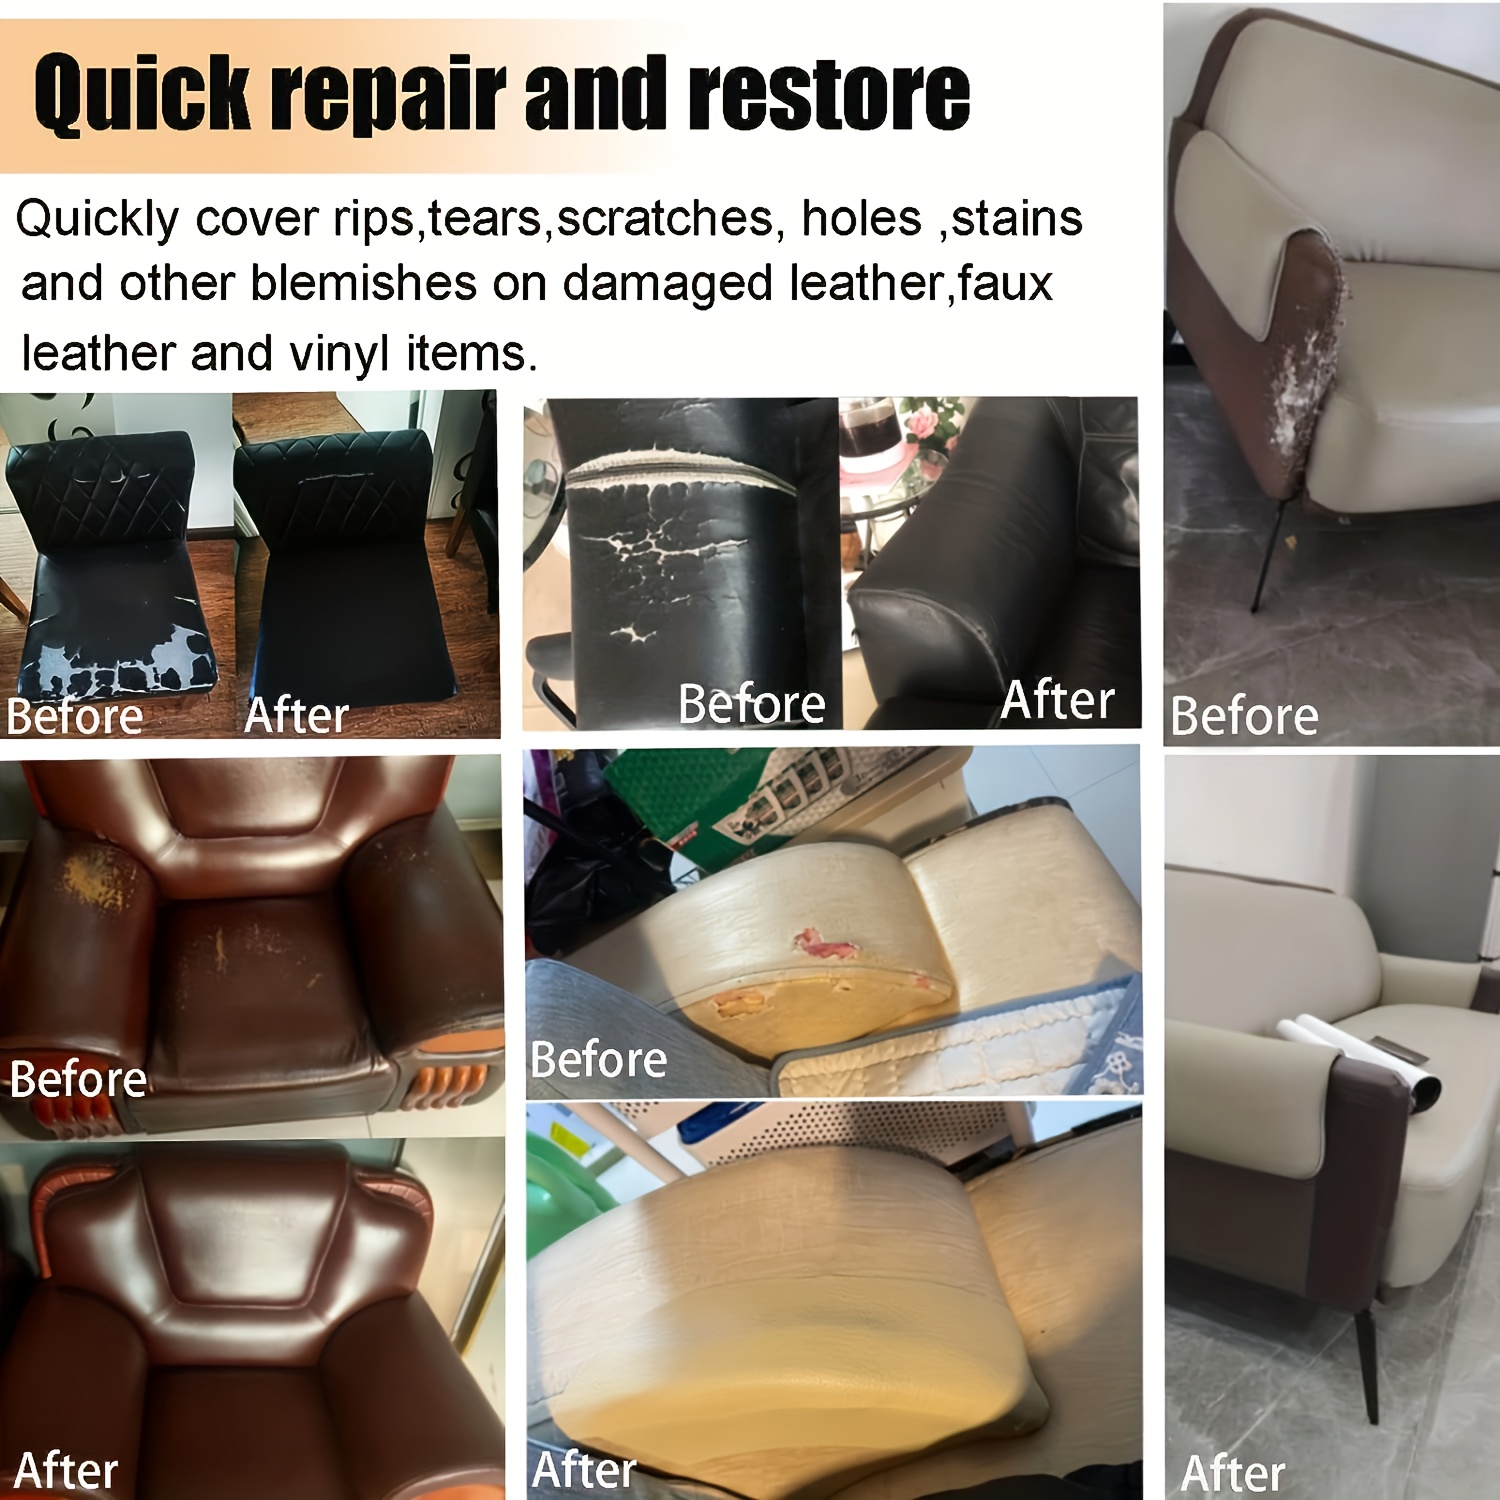  Dark Brown Leather Repair Kits for Couches, Leather Repair  Patch, Vinyl Repair Kit - Leather Repair Kit for Car Seats, Vinyl  Upholstery, Sofa - Cat Scratch Tape, Dark Brown Tape for